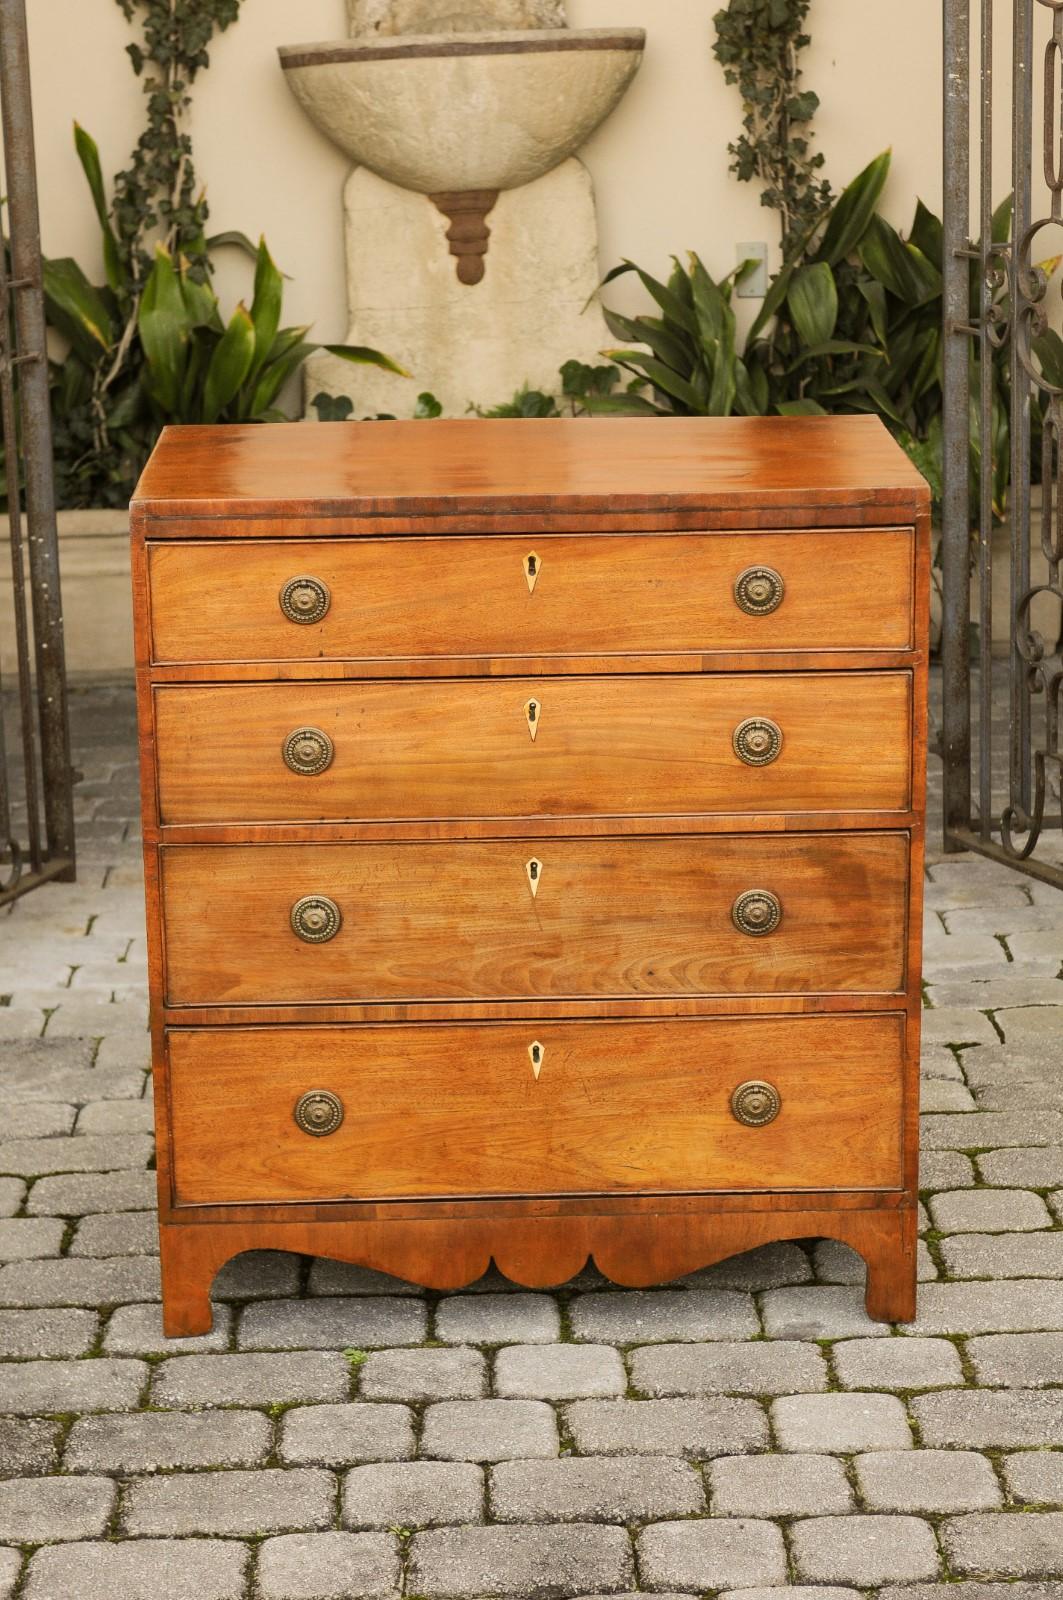 An English mahogany four-drawer commode from the mid-19th century, with graduated drawers and scalloped skirt. This English mahogany chest features a rectangular top sitting above four graduated drawers, each fitted with brass hardware and an inlaid